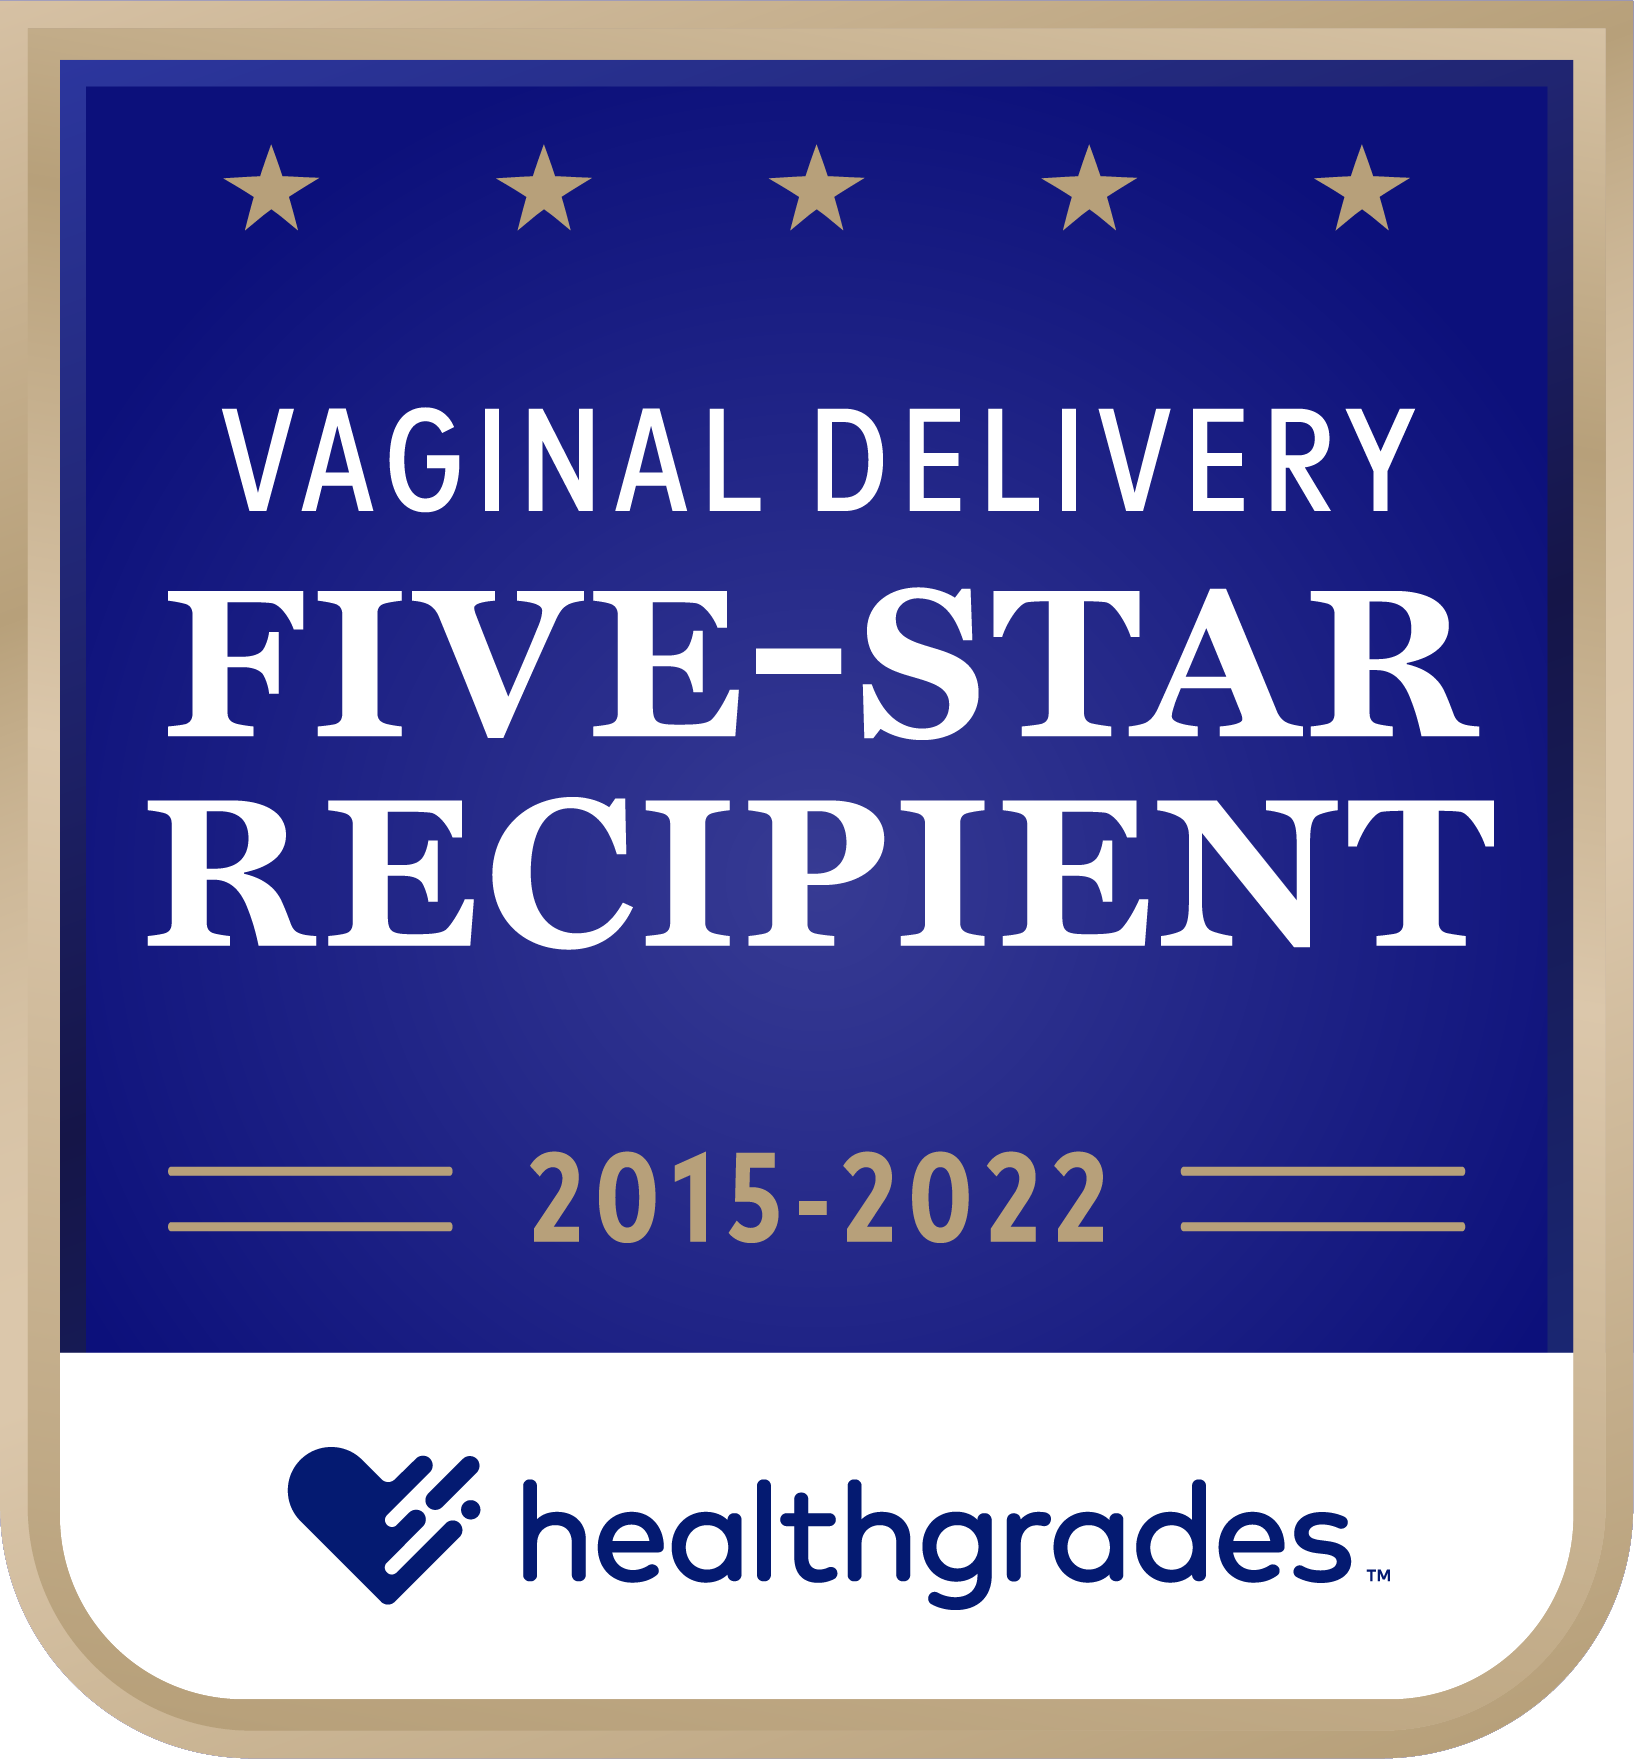 Five-Star Recipient for Vaginal Delivery for 8 Years in a Row (2015-2022)